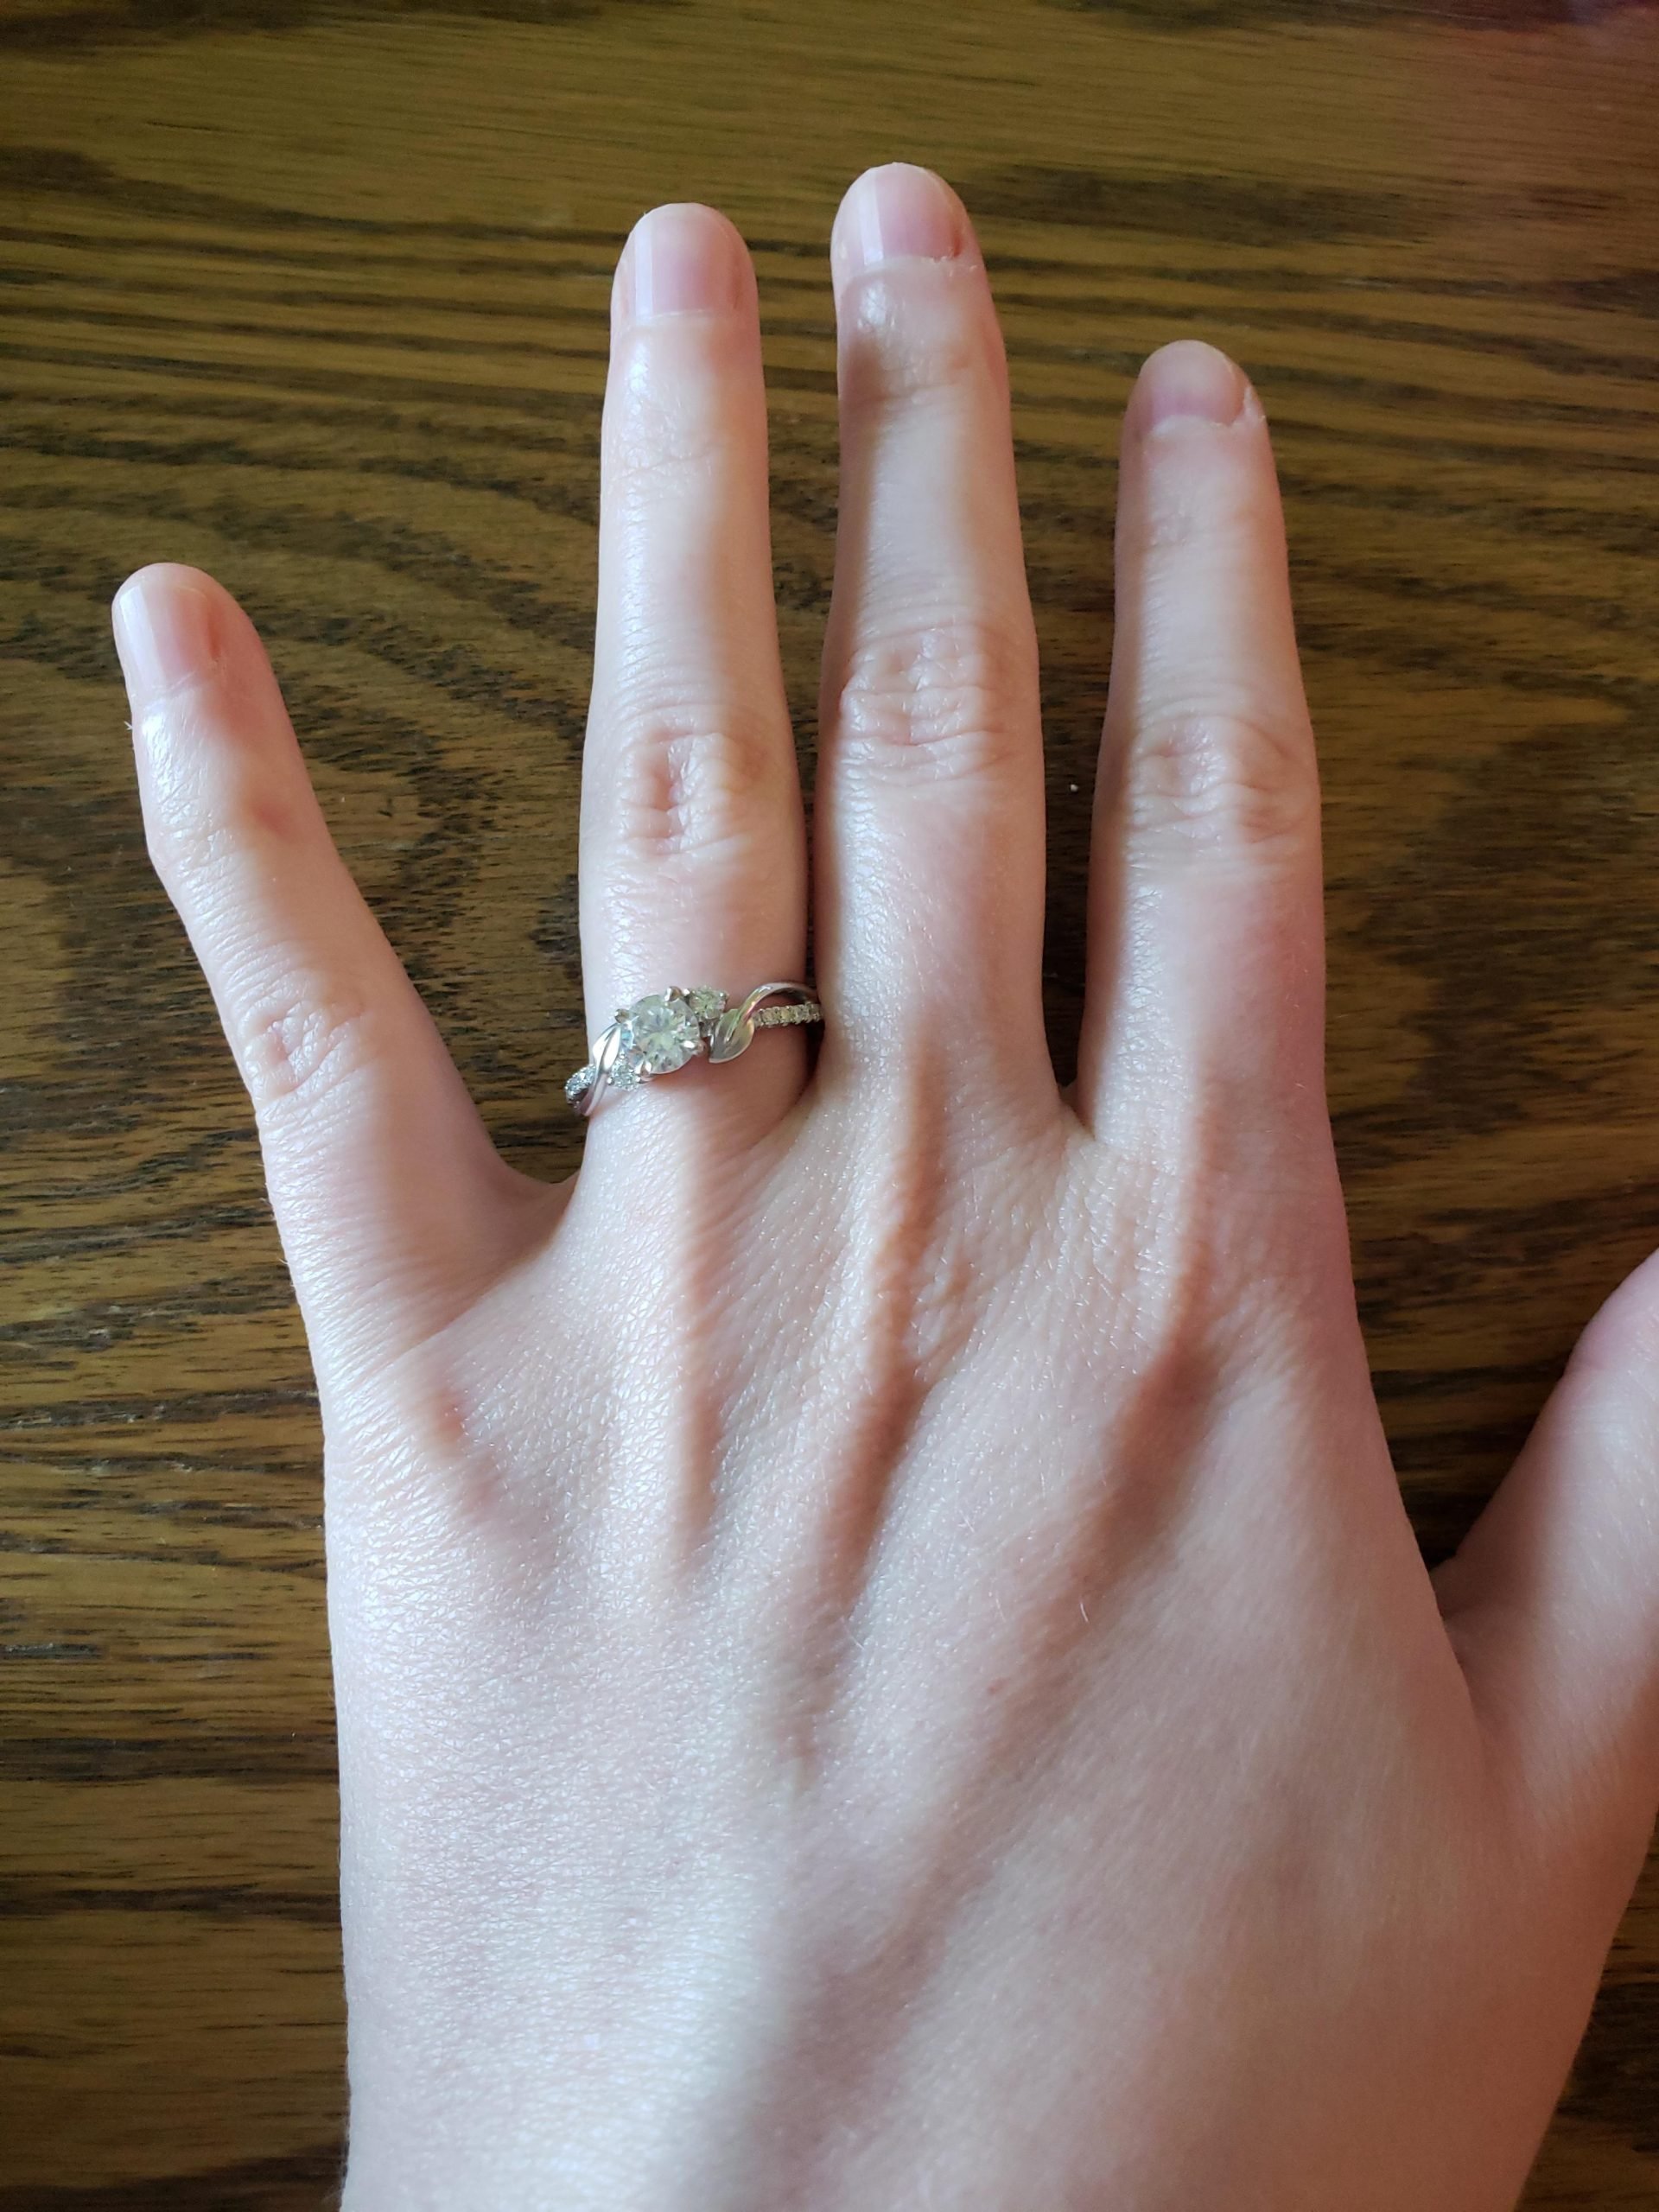 Is it ok to use my engagement ring as a wedding ring or do ...